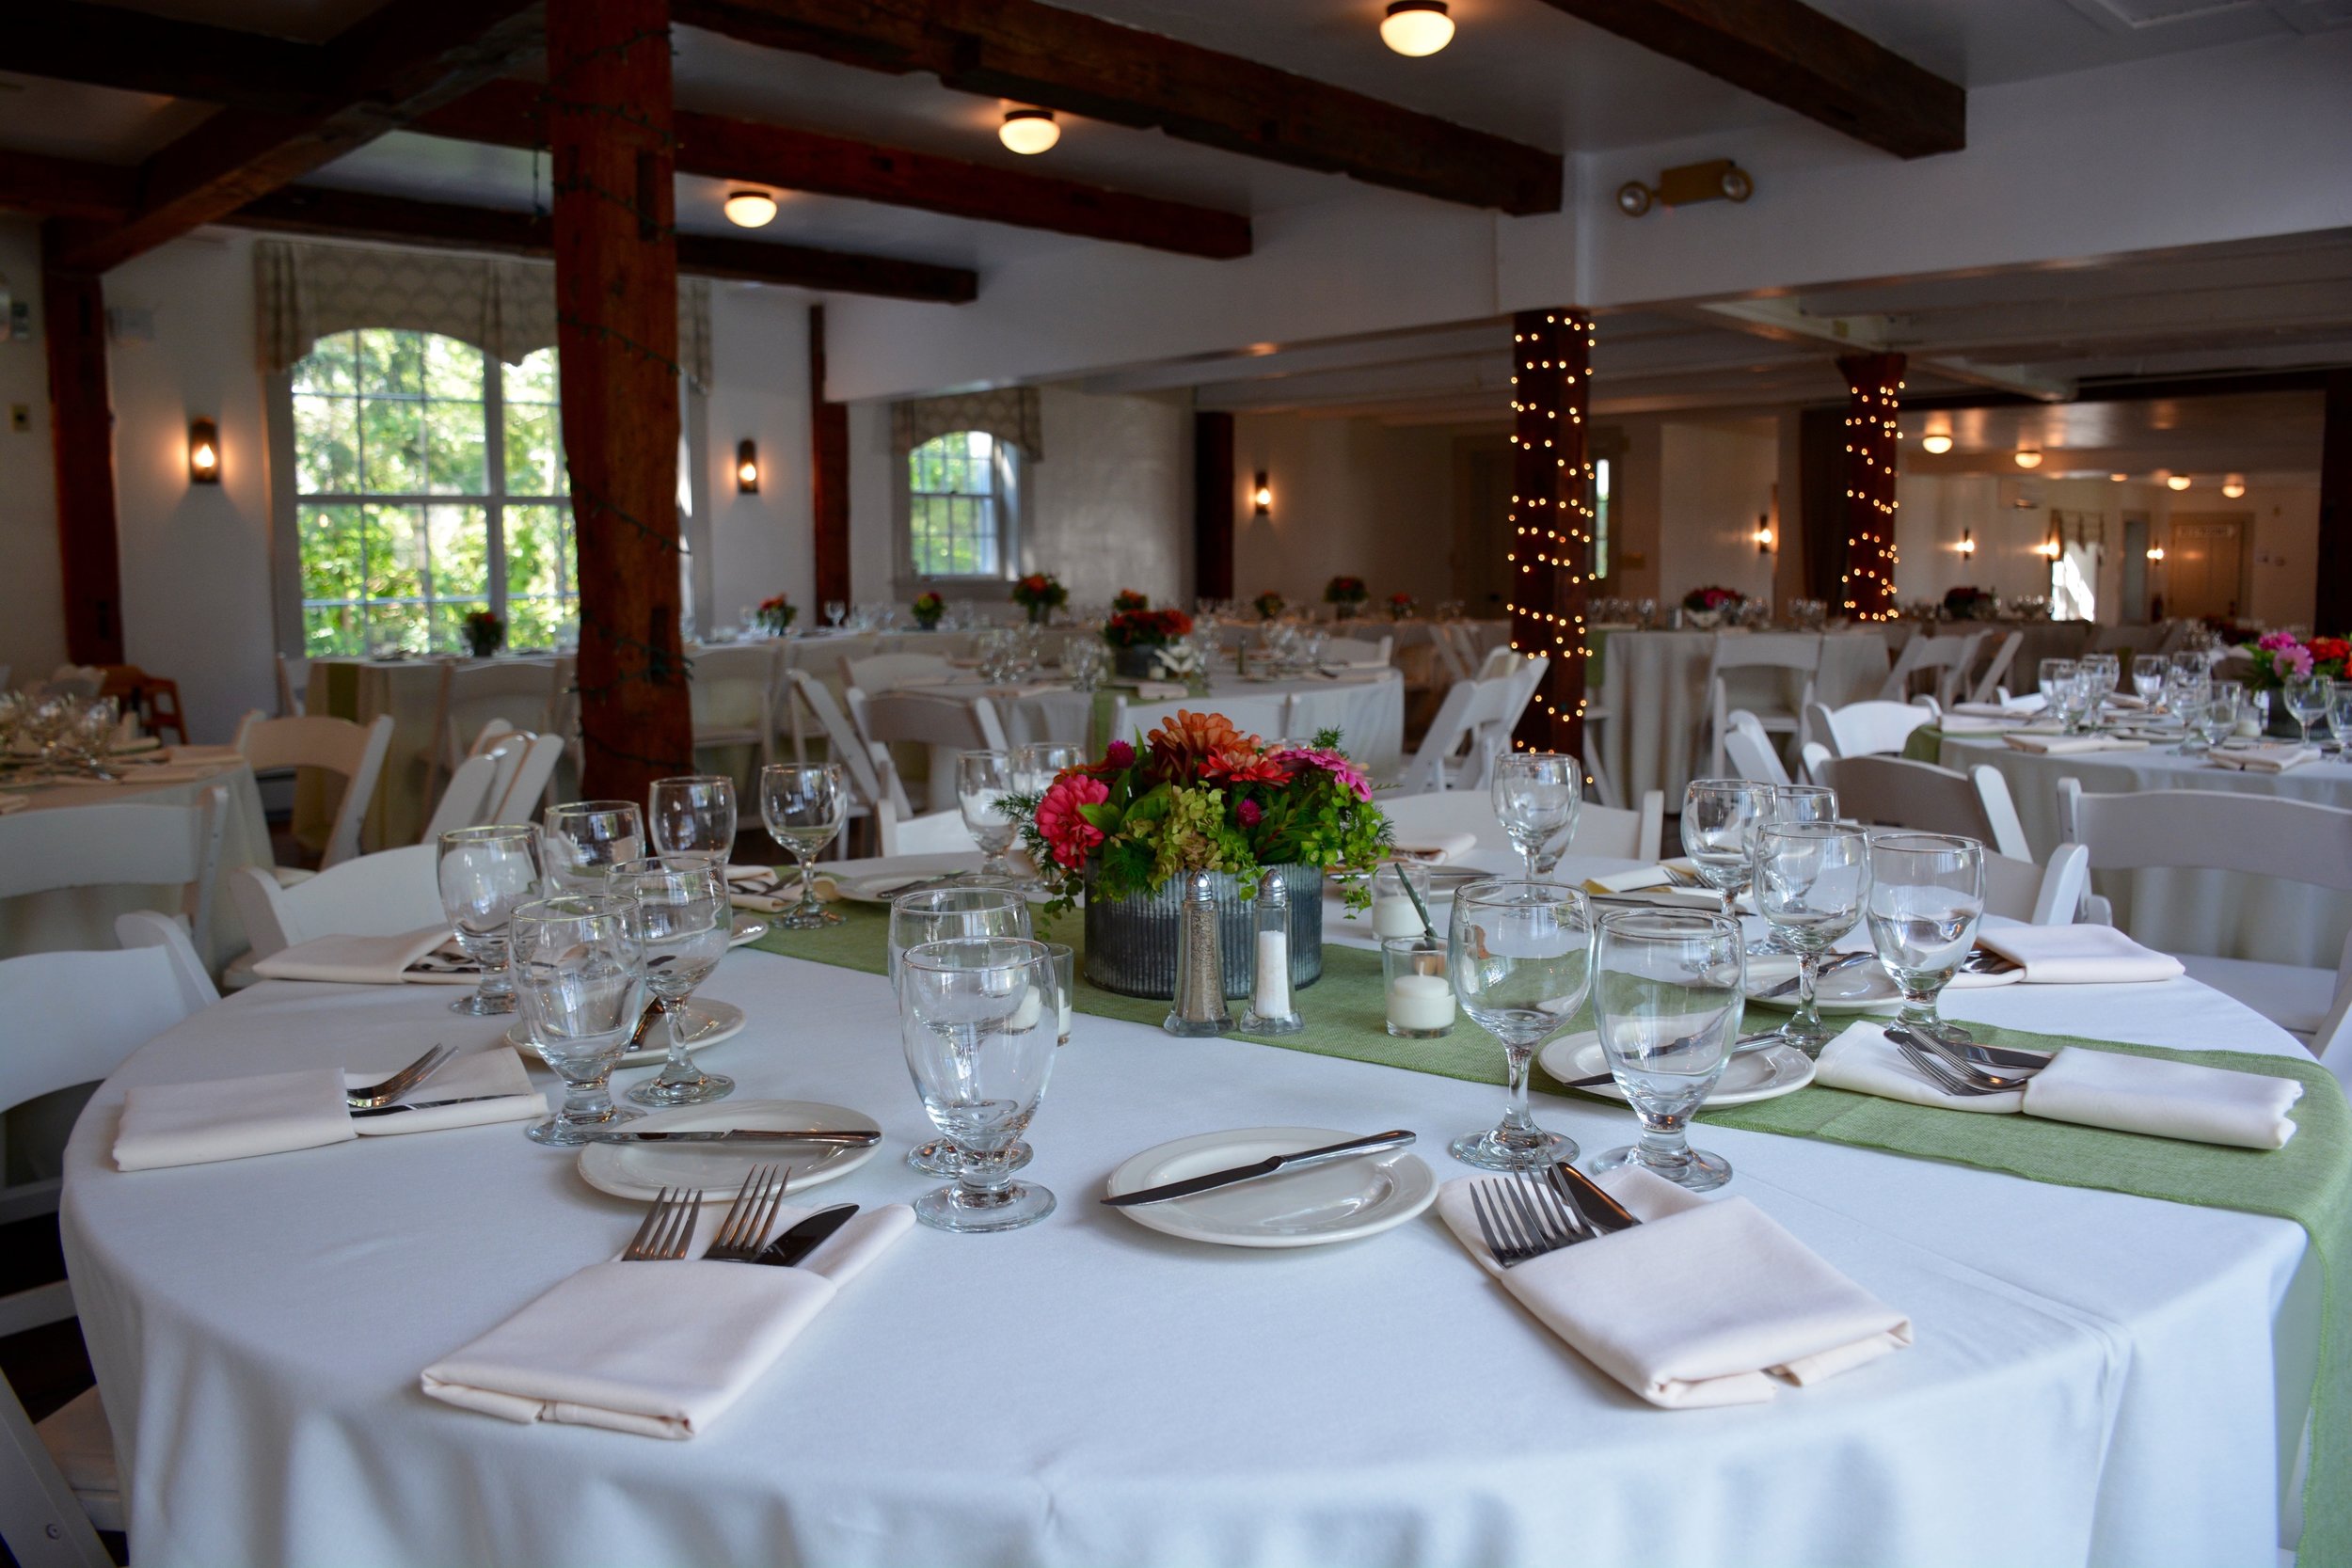 Banquet Hall a the Dowds' Country Inn - Weddings & Special Events - Lyme, NH